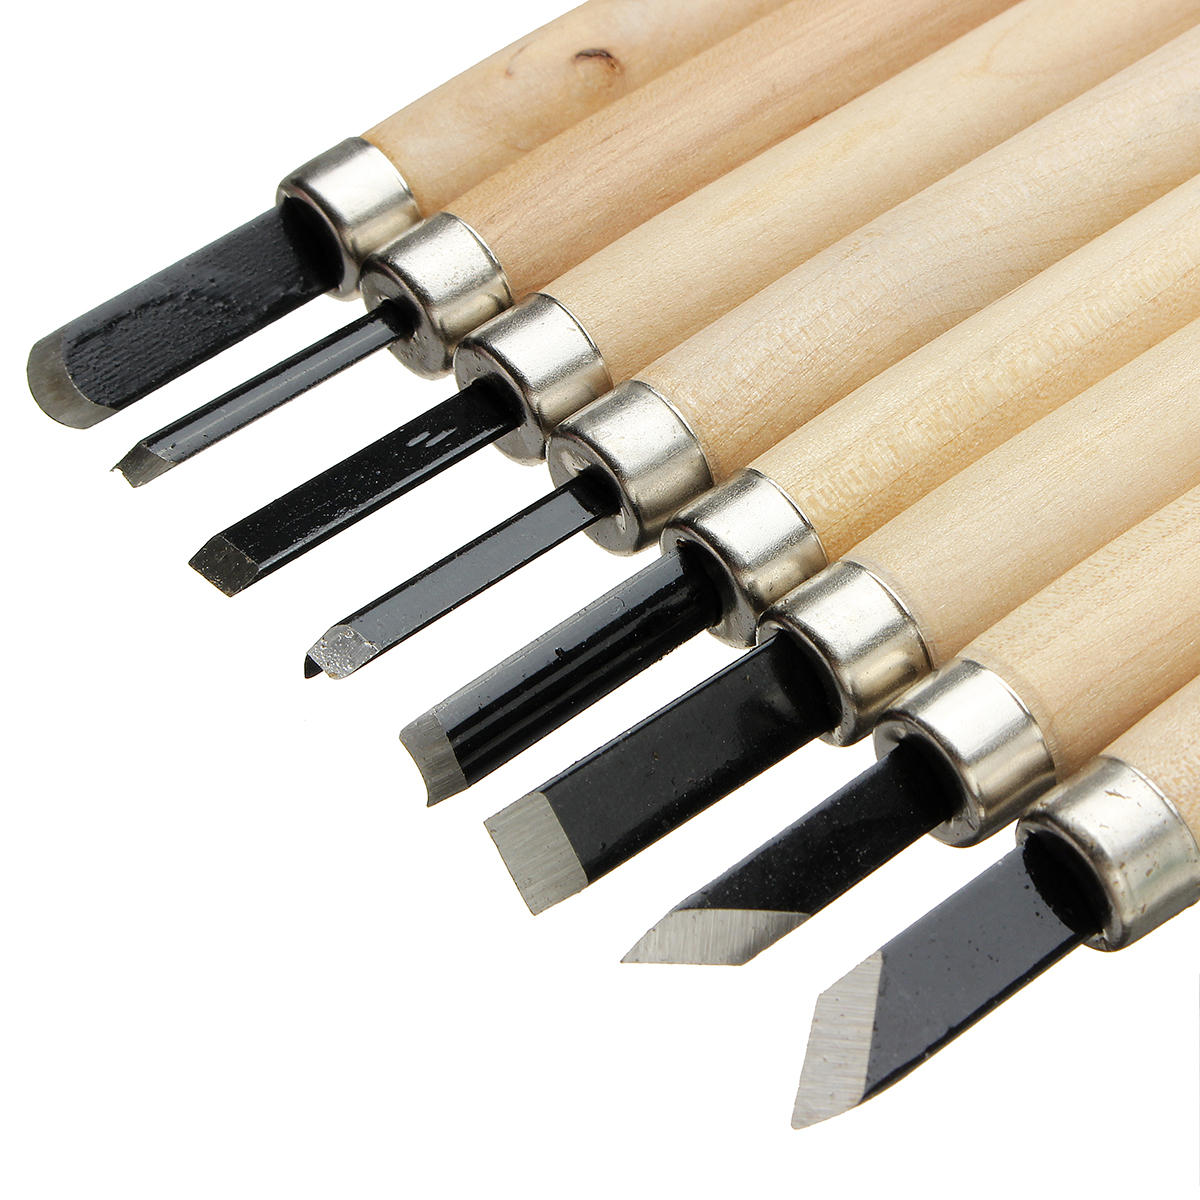 

3/8/12pcs Wood Carving Chisels Cutter Craft Hand Woodworking Tools For Sculpture Engraving